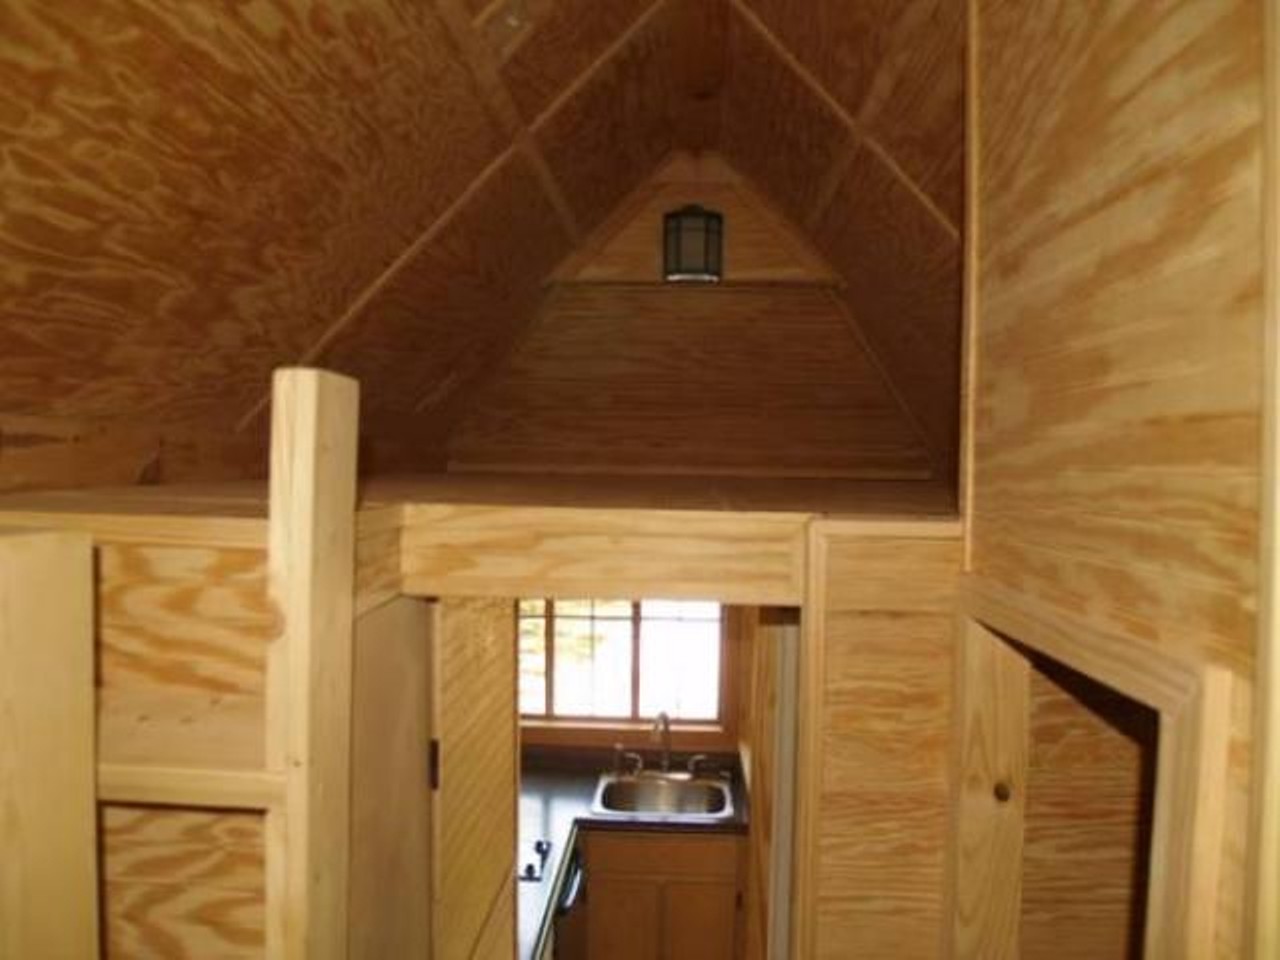 Tumbleweed Cypress 20
Price: $44000
Size: 144 sq ft 
There's enough room up there for a bed tent!